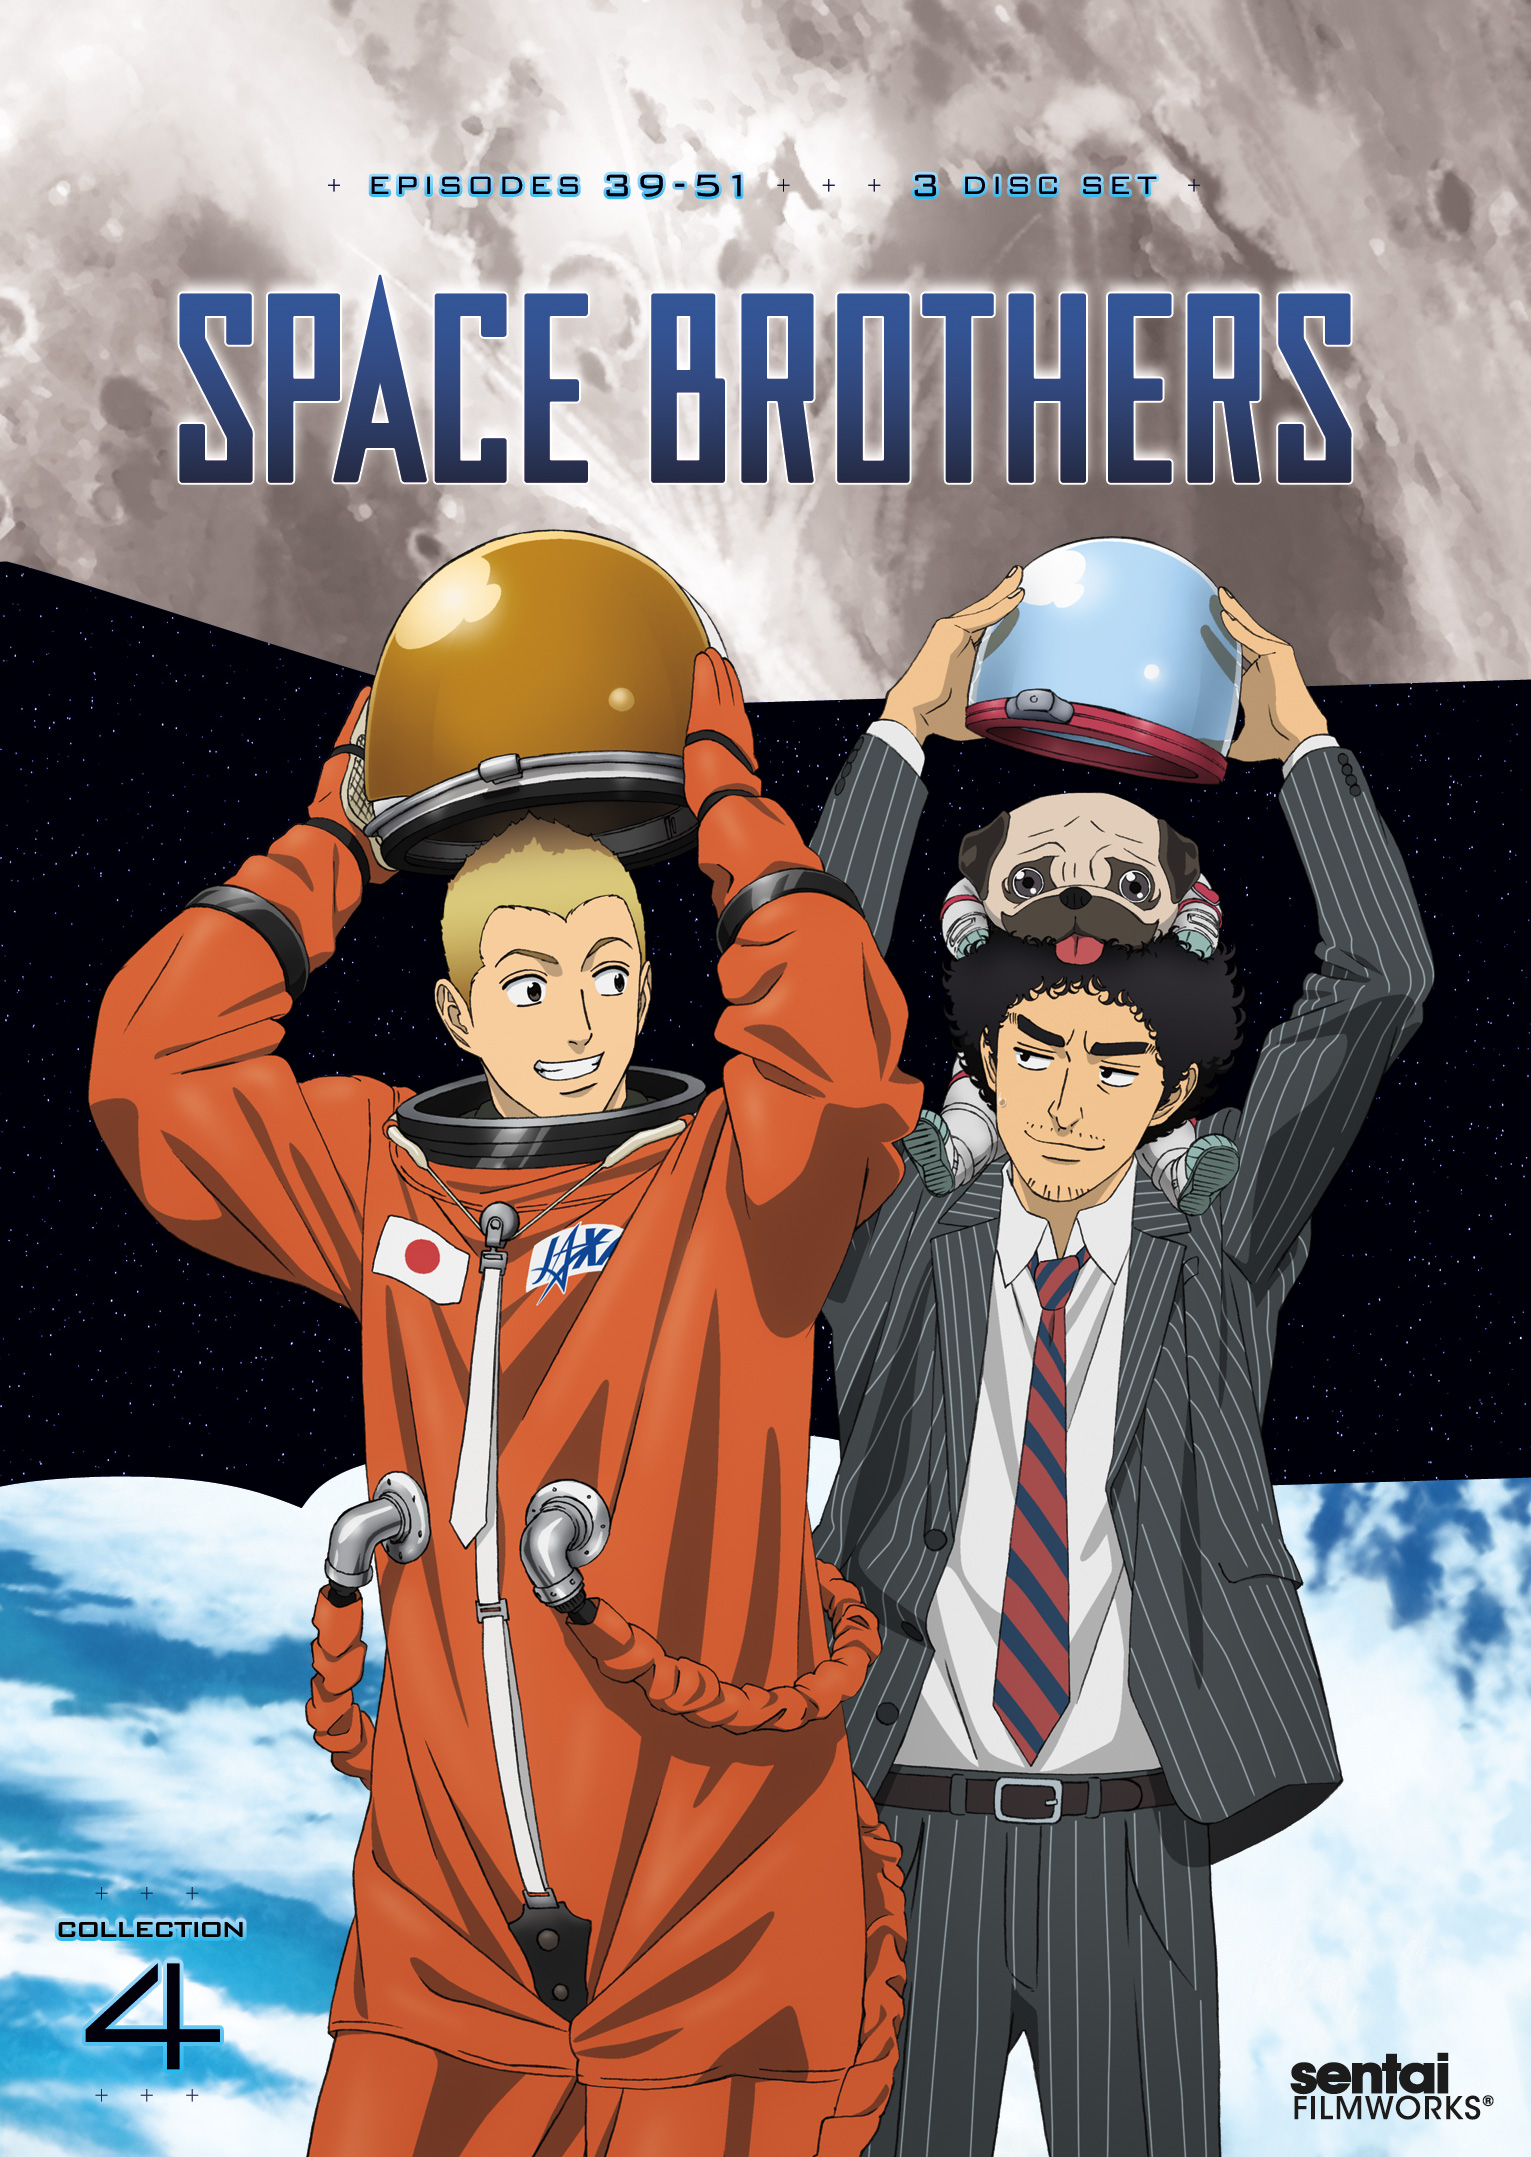 space-brothers-collection-4-3-discs-dvd-best-buy